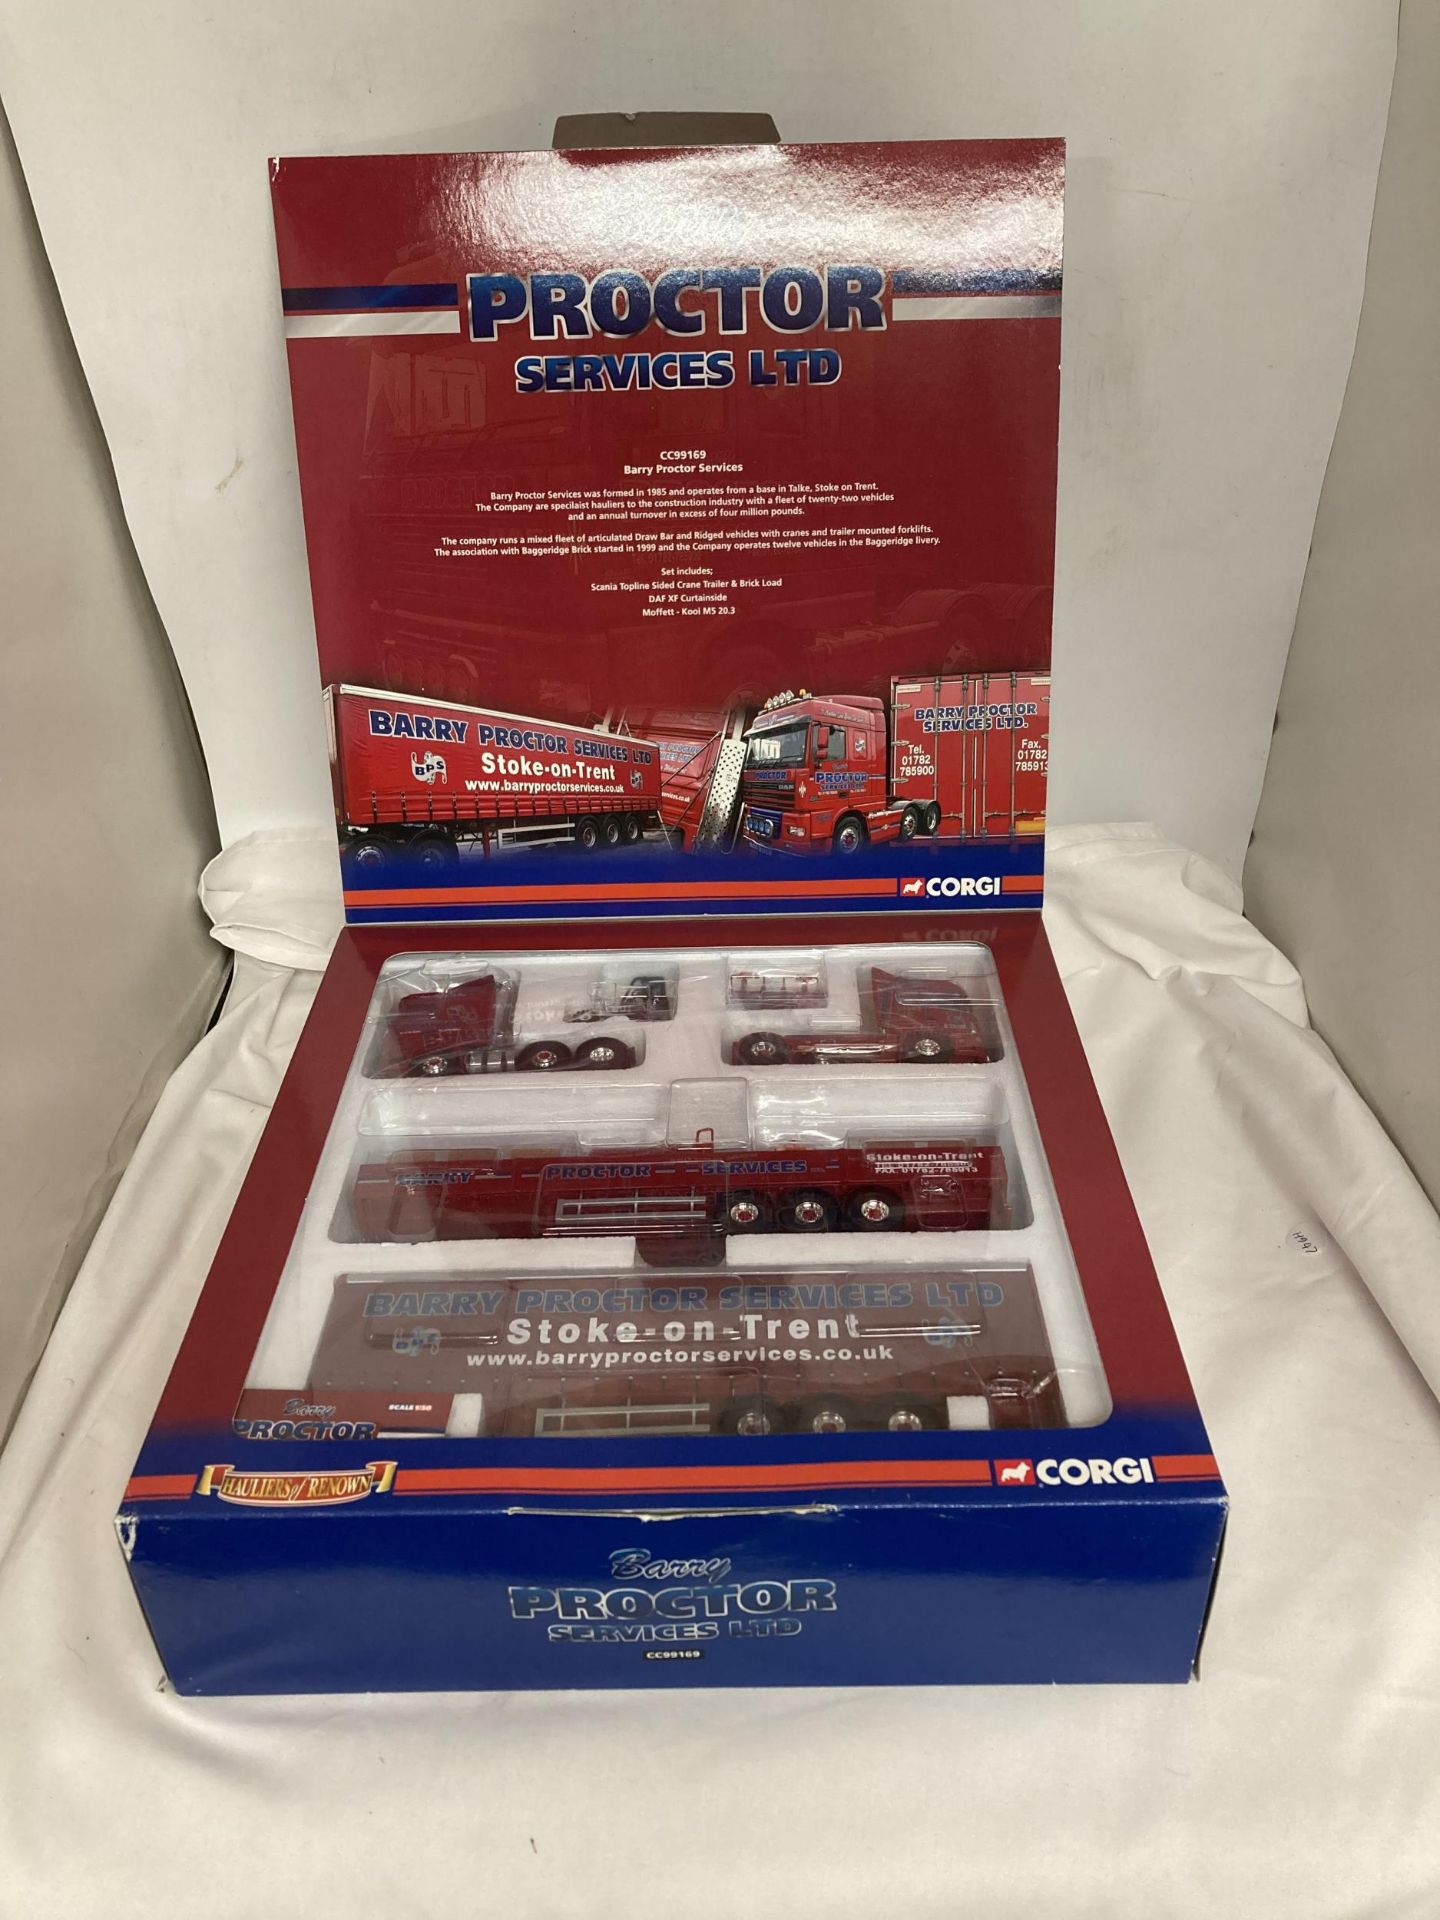 A CORGI MODEL NO. CC99169 - BARRY PROCTOR SERVICES LIMITED (MINT) BOXED 1:50 SCALE - Image 3 of 3